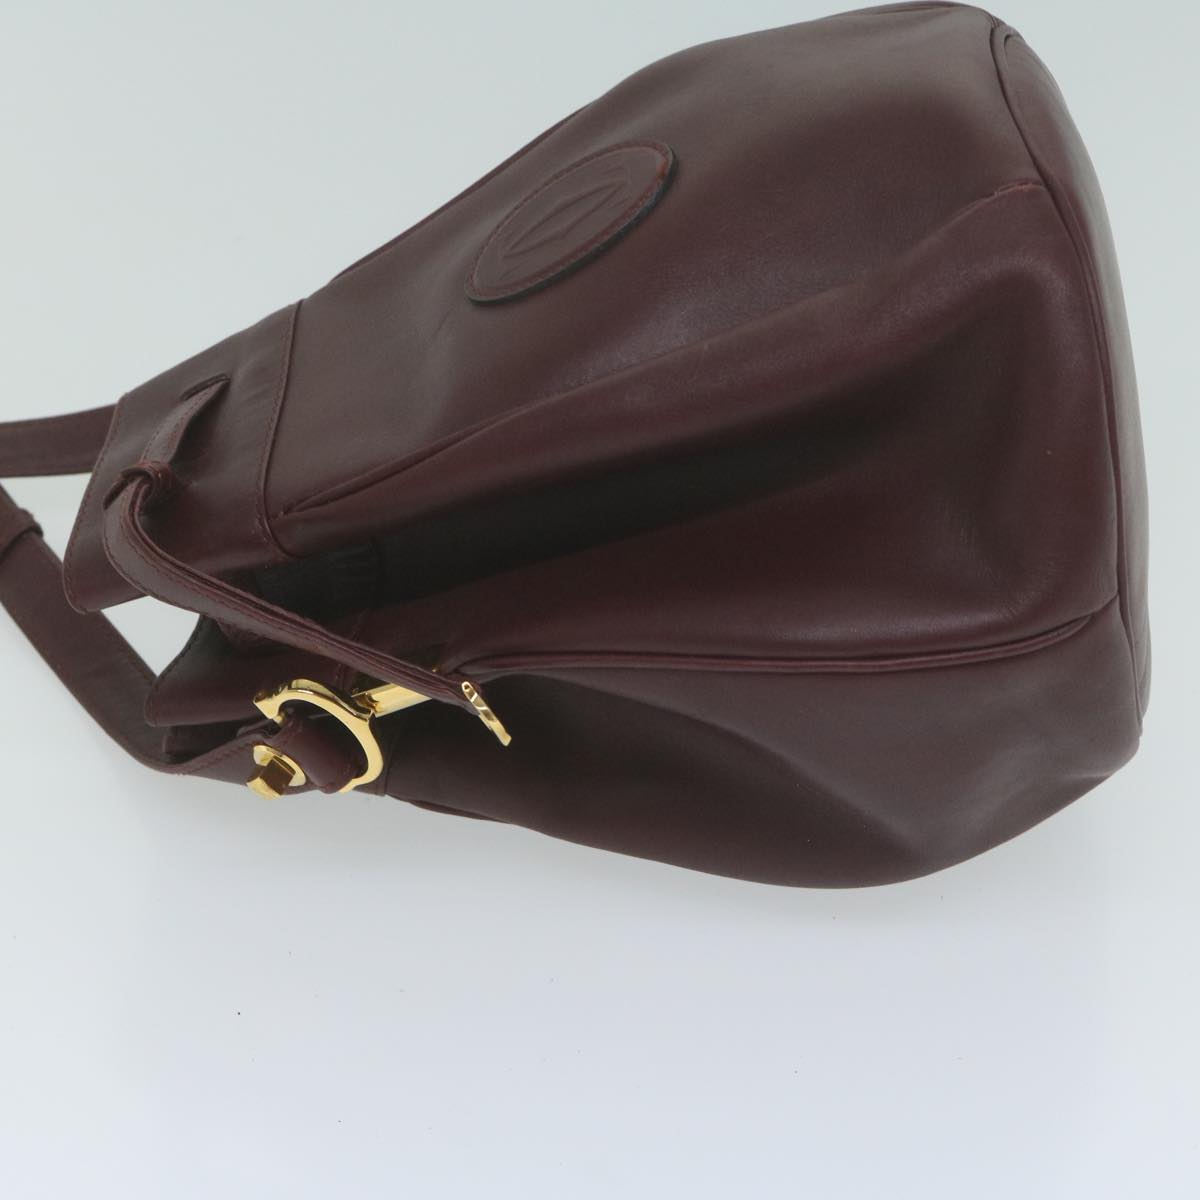 CARTIER Shoulder Bag Leather Wine Red Auth bs11743